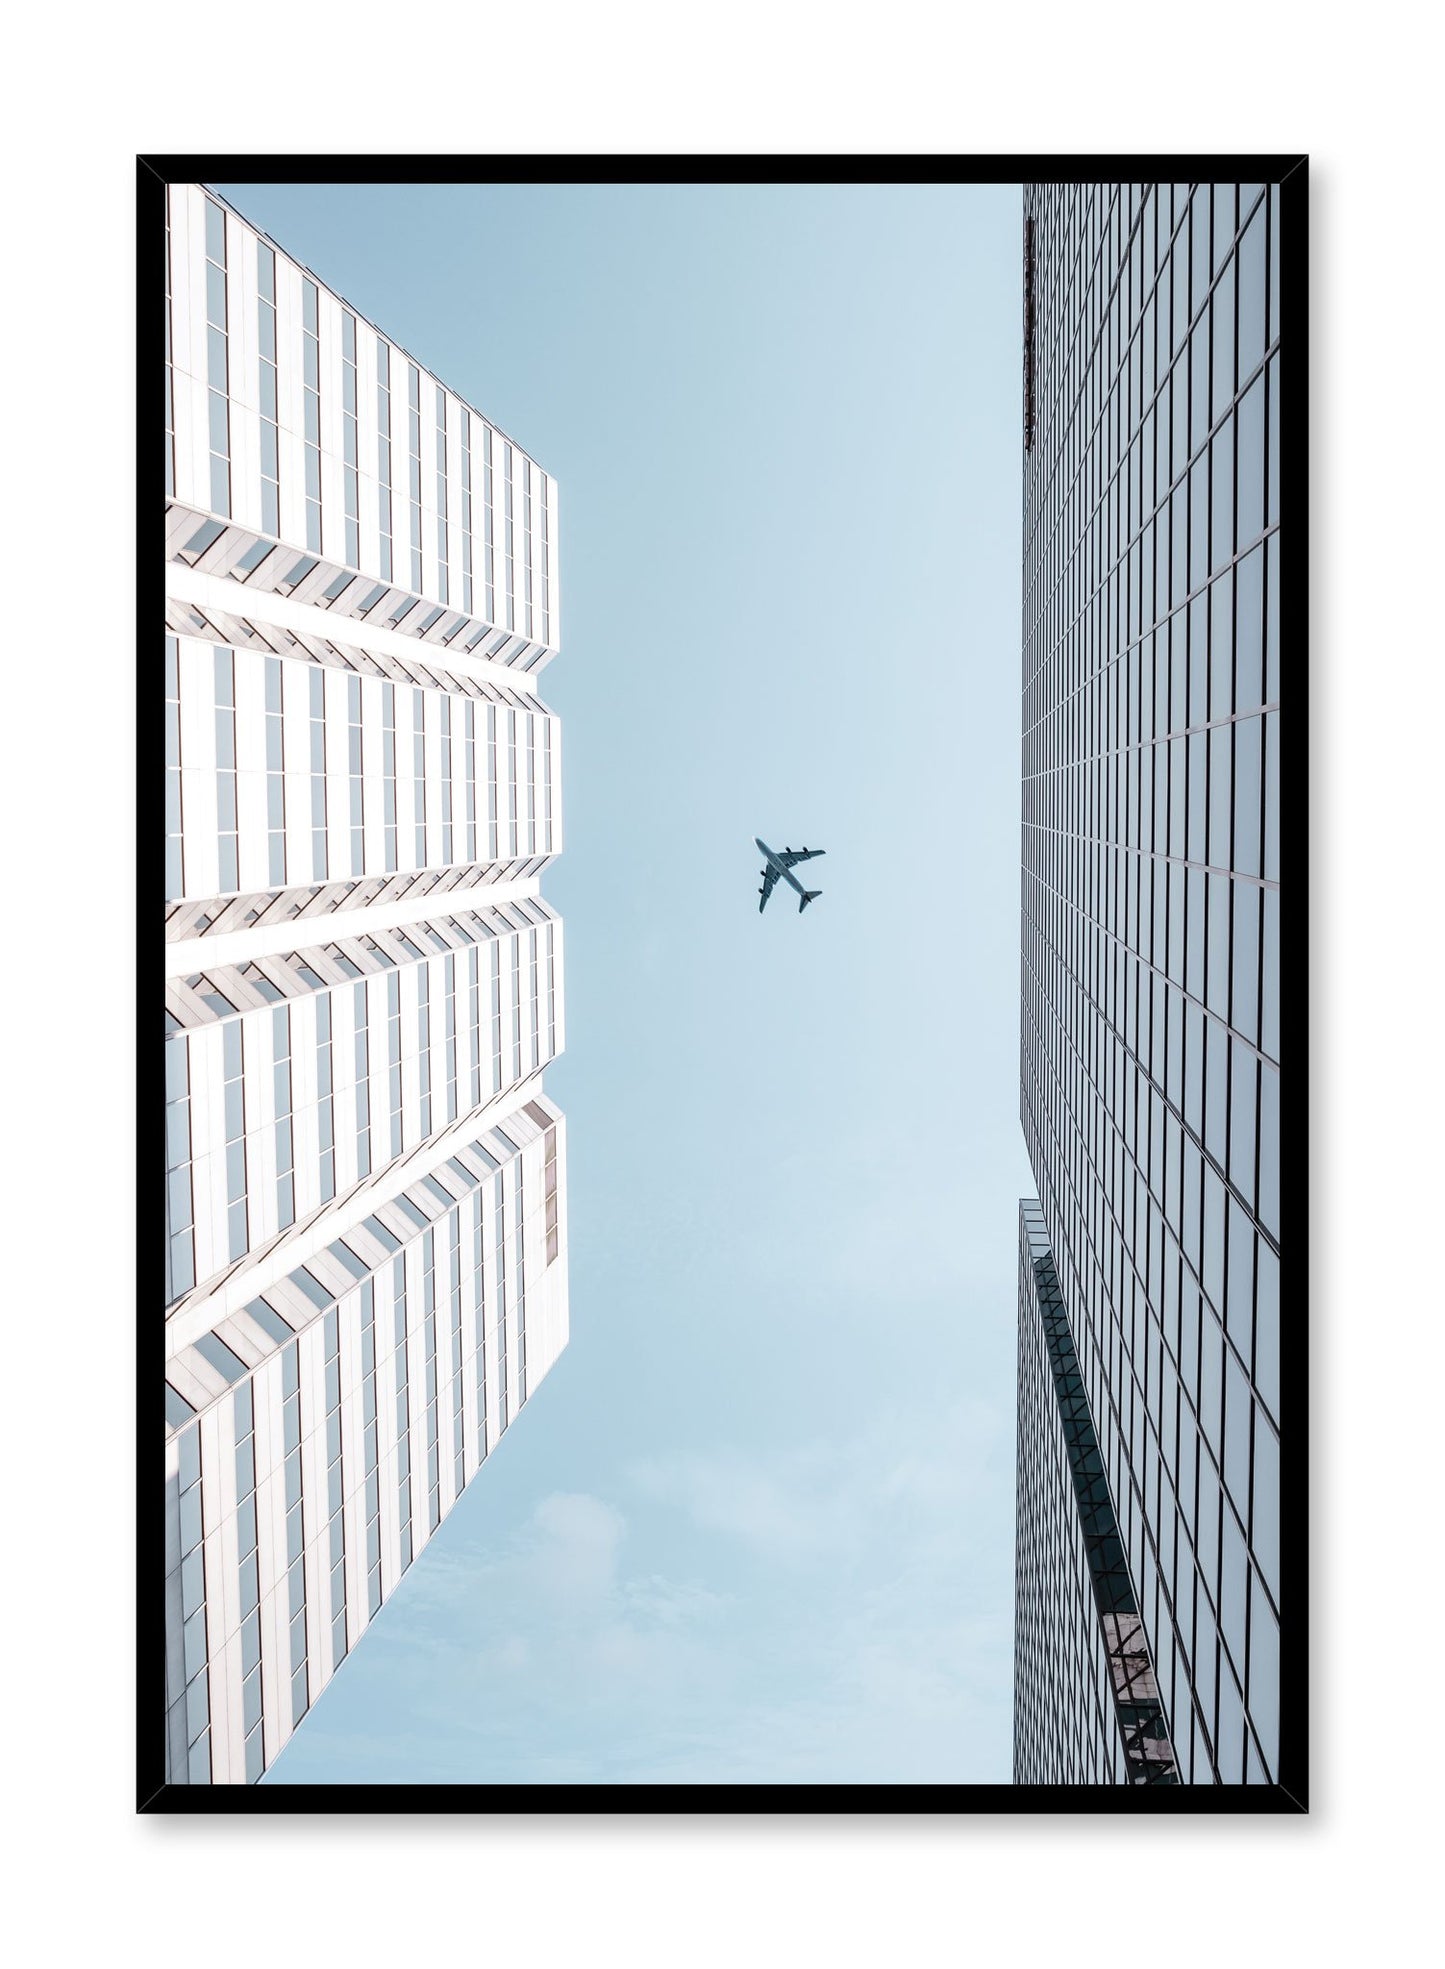 Minimalist design poster by Opposite Wall with urban photography of airplane over city